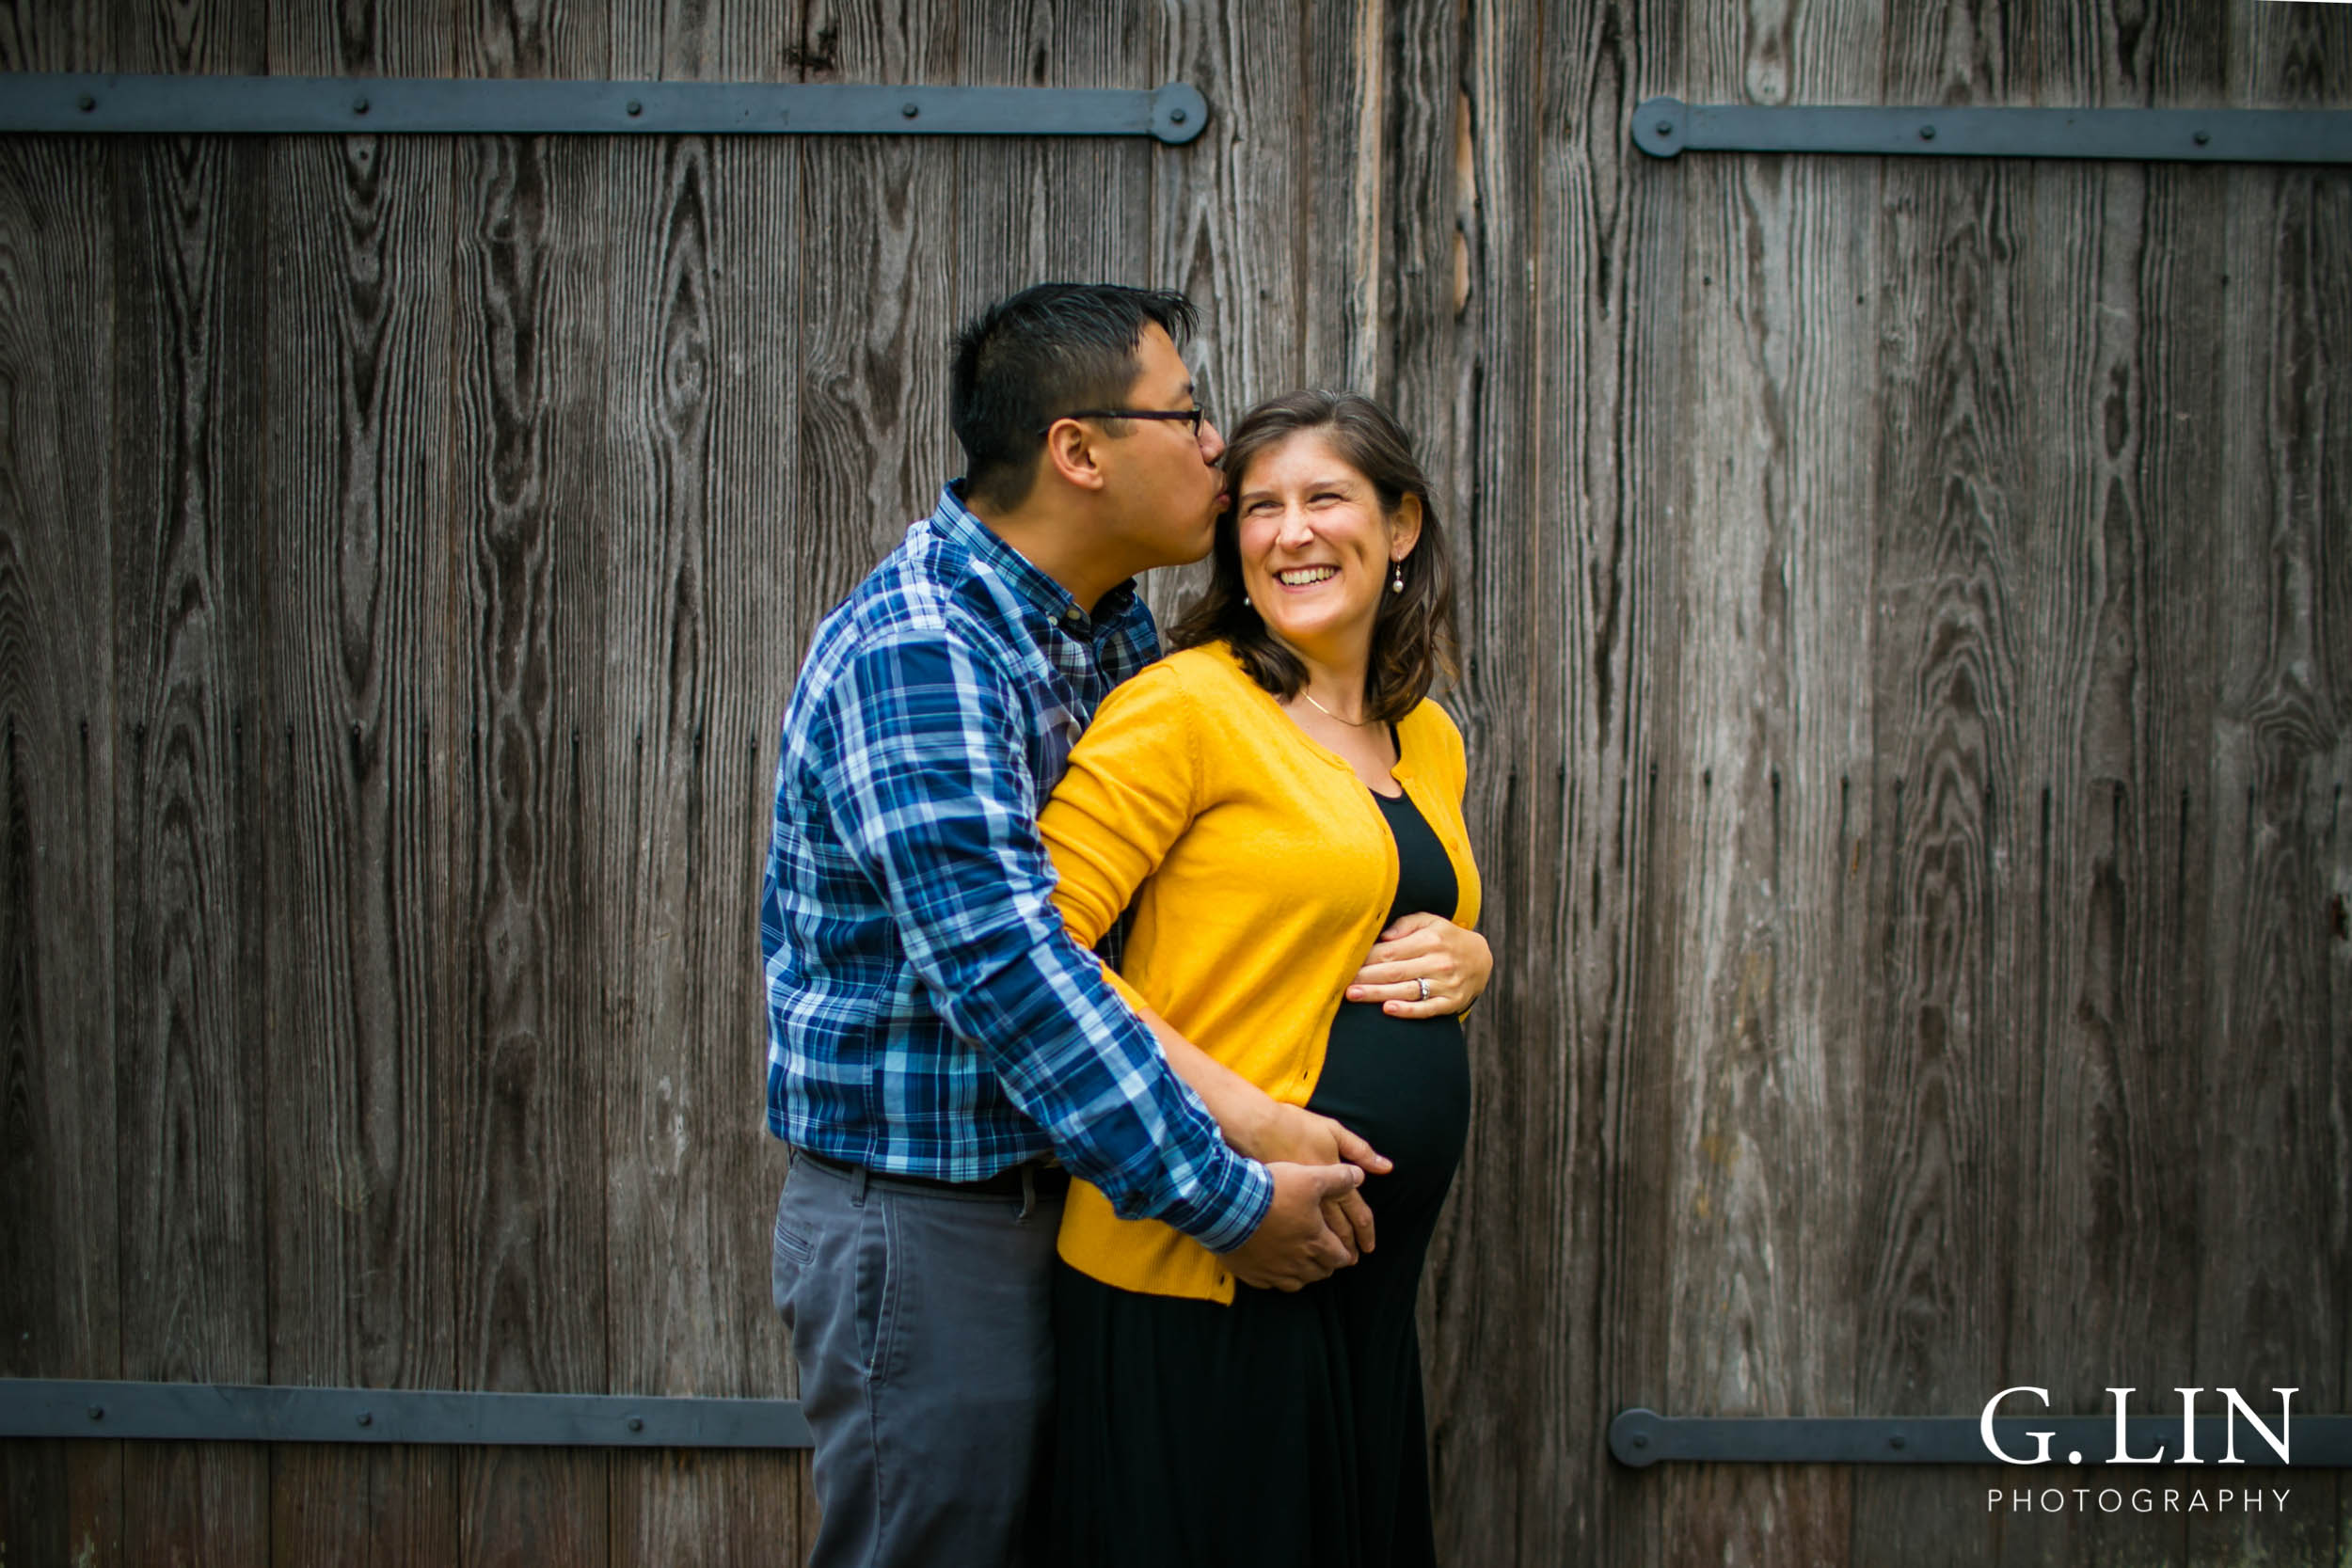 Durham Family Photography | G. Lin Photography | Husband kissing wife in park